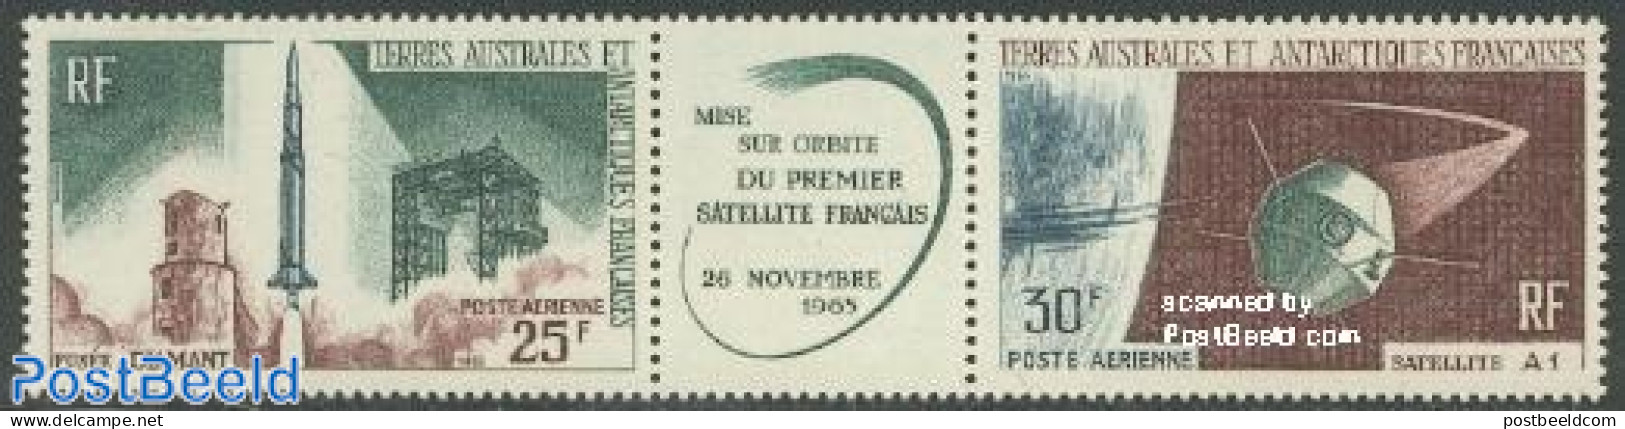 French Antarctic Territory 1966 Satellites 2v+tab [:T:], Mint NH, Transport - Various - Space Exploration - Joint Issues - Ungebraucht